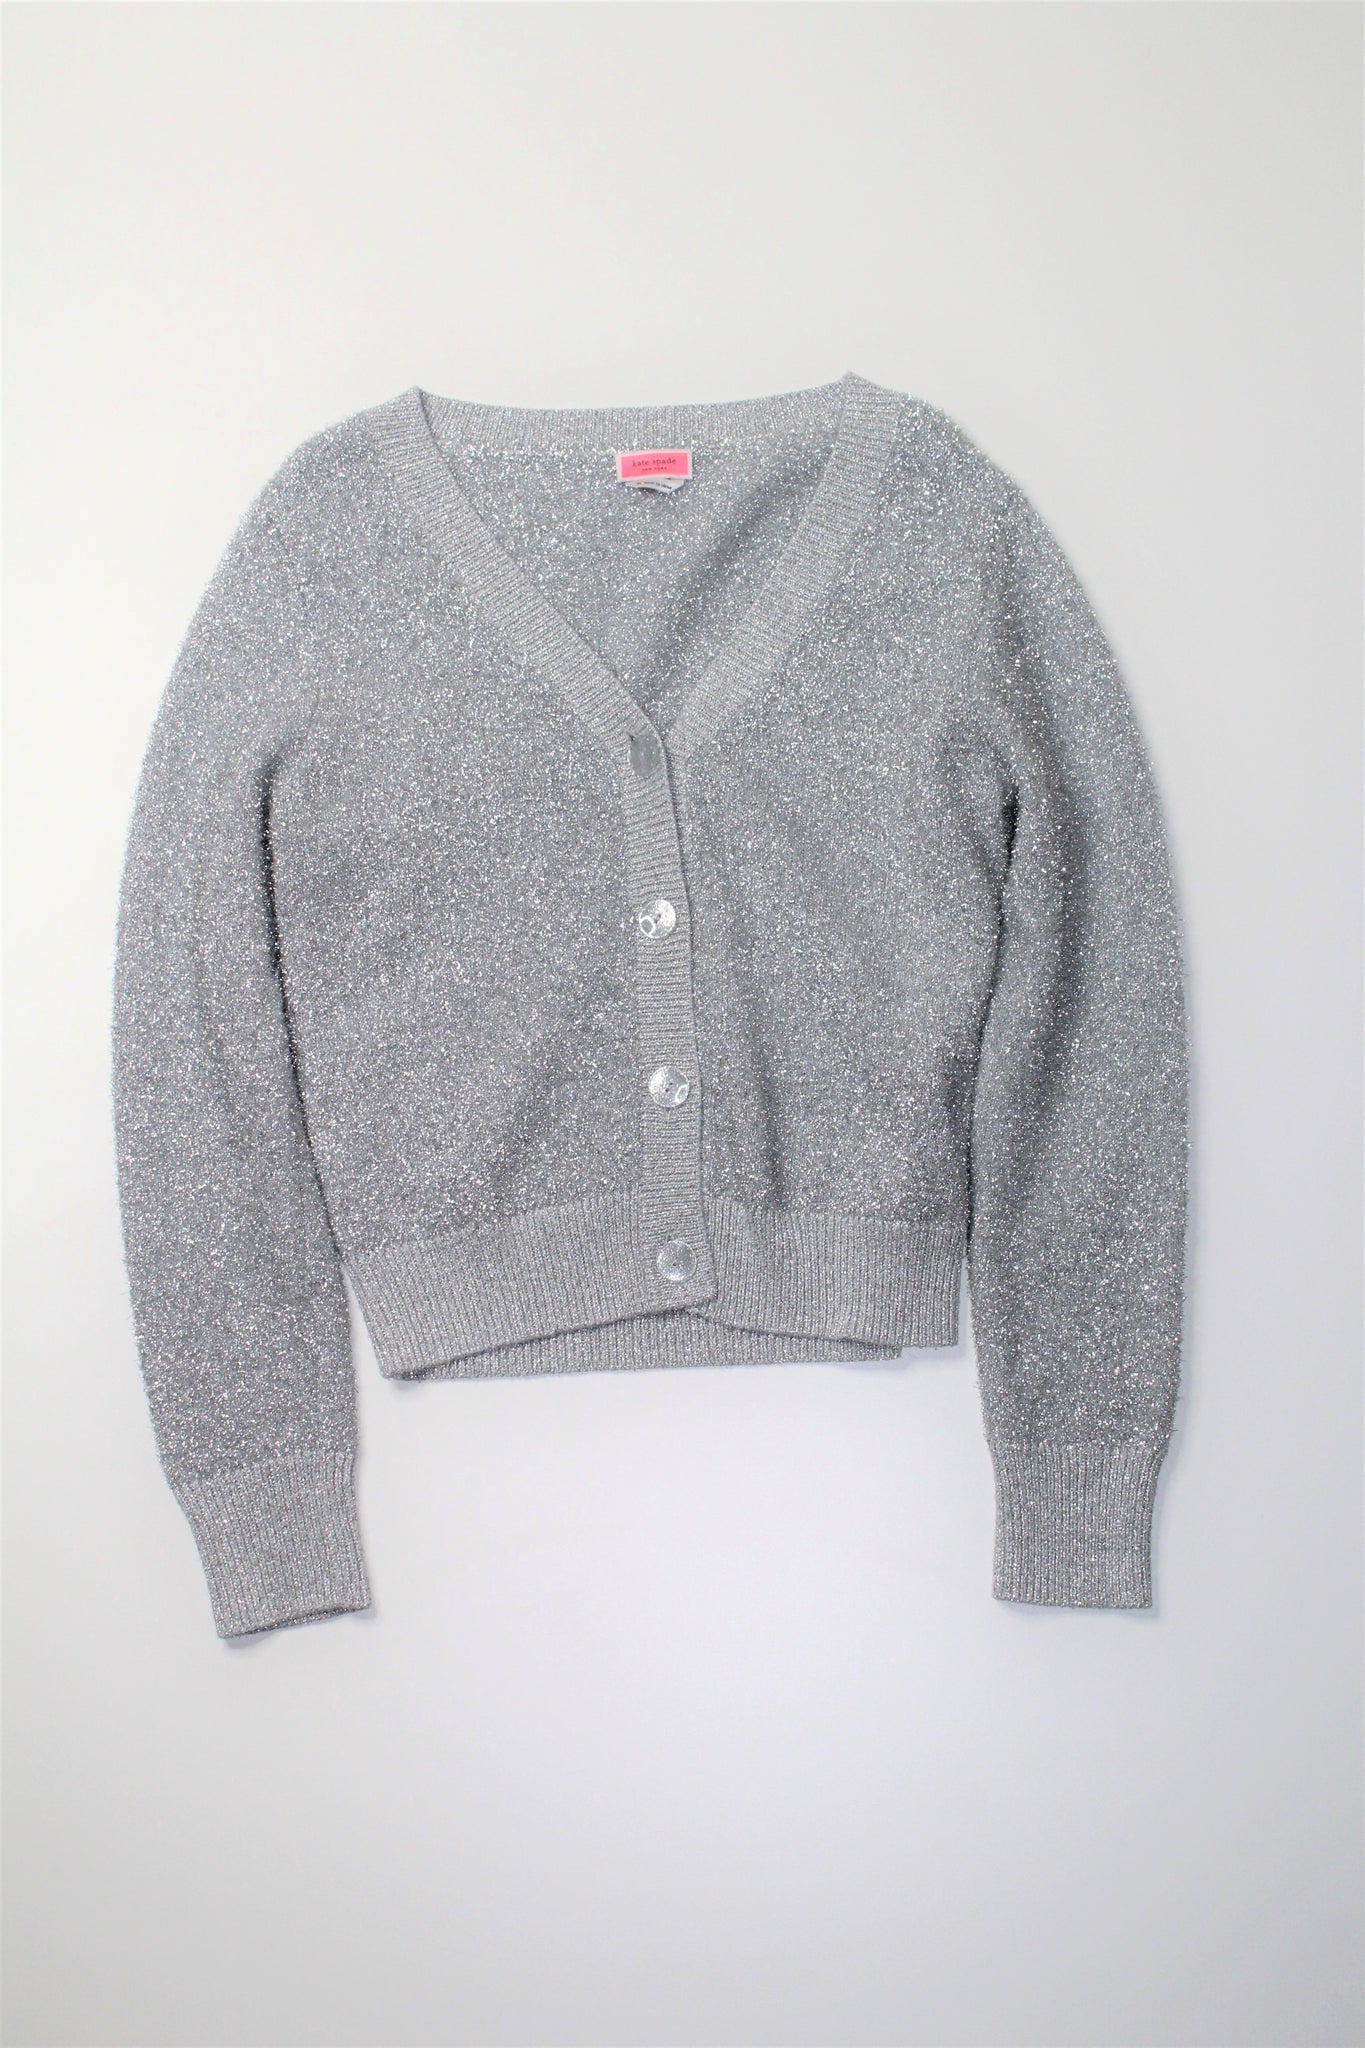 Kate Spade silver sparkle cardigan sweater, size medium – Belle Boutique  Consignment